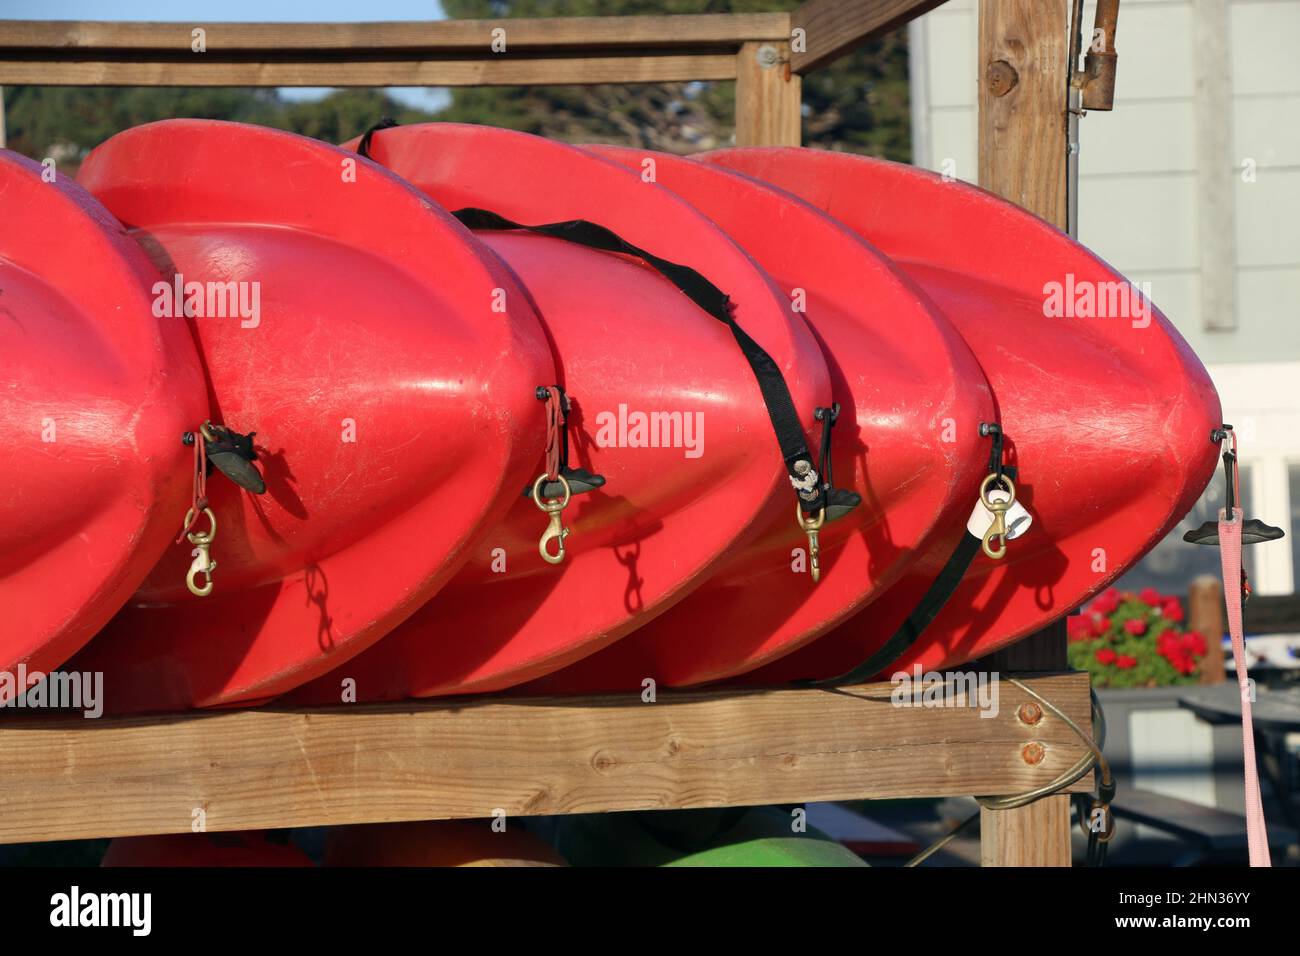 Bright red kayaks in a row, Monterey, CA. Stock Photo